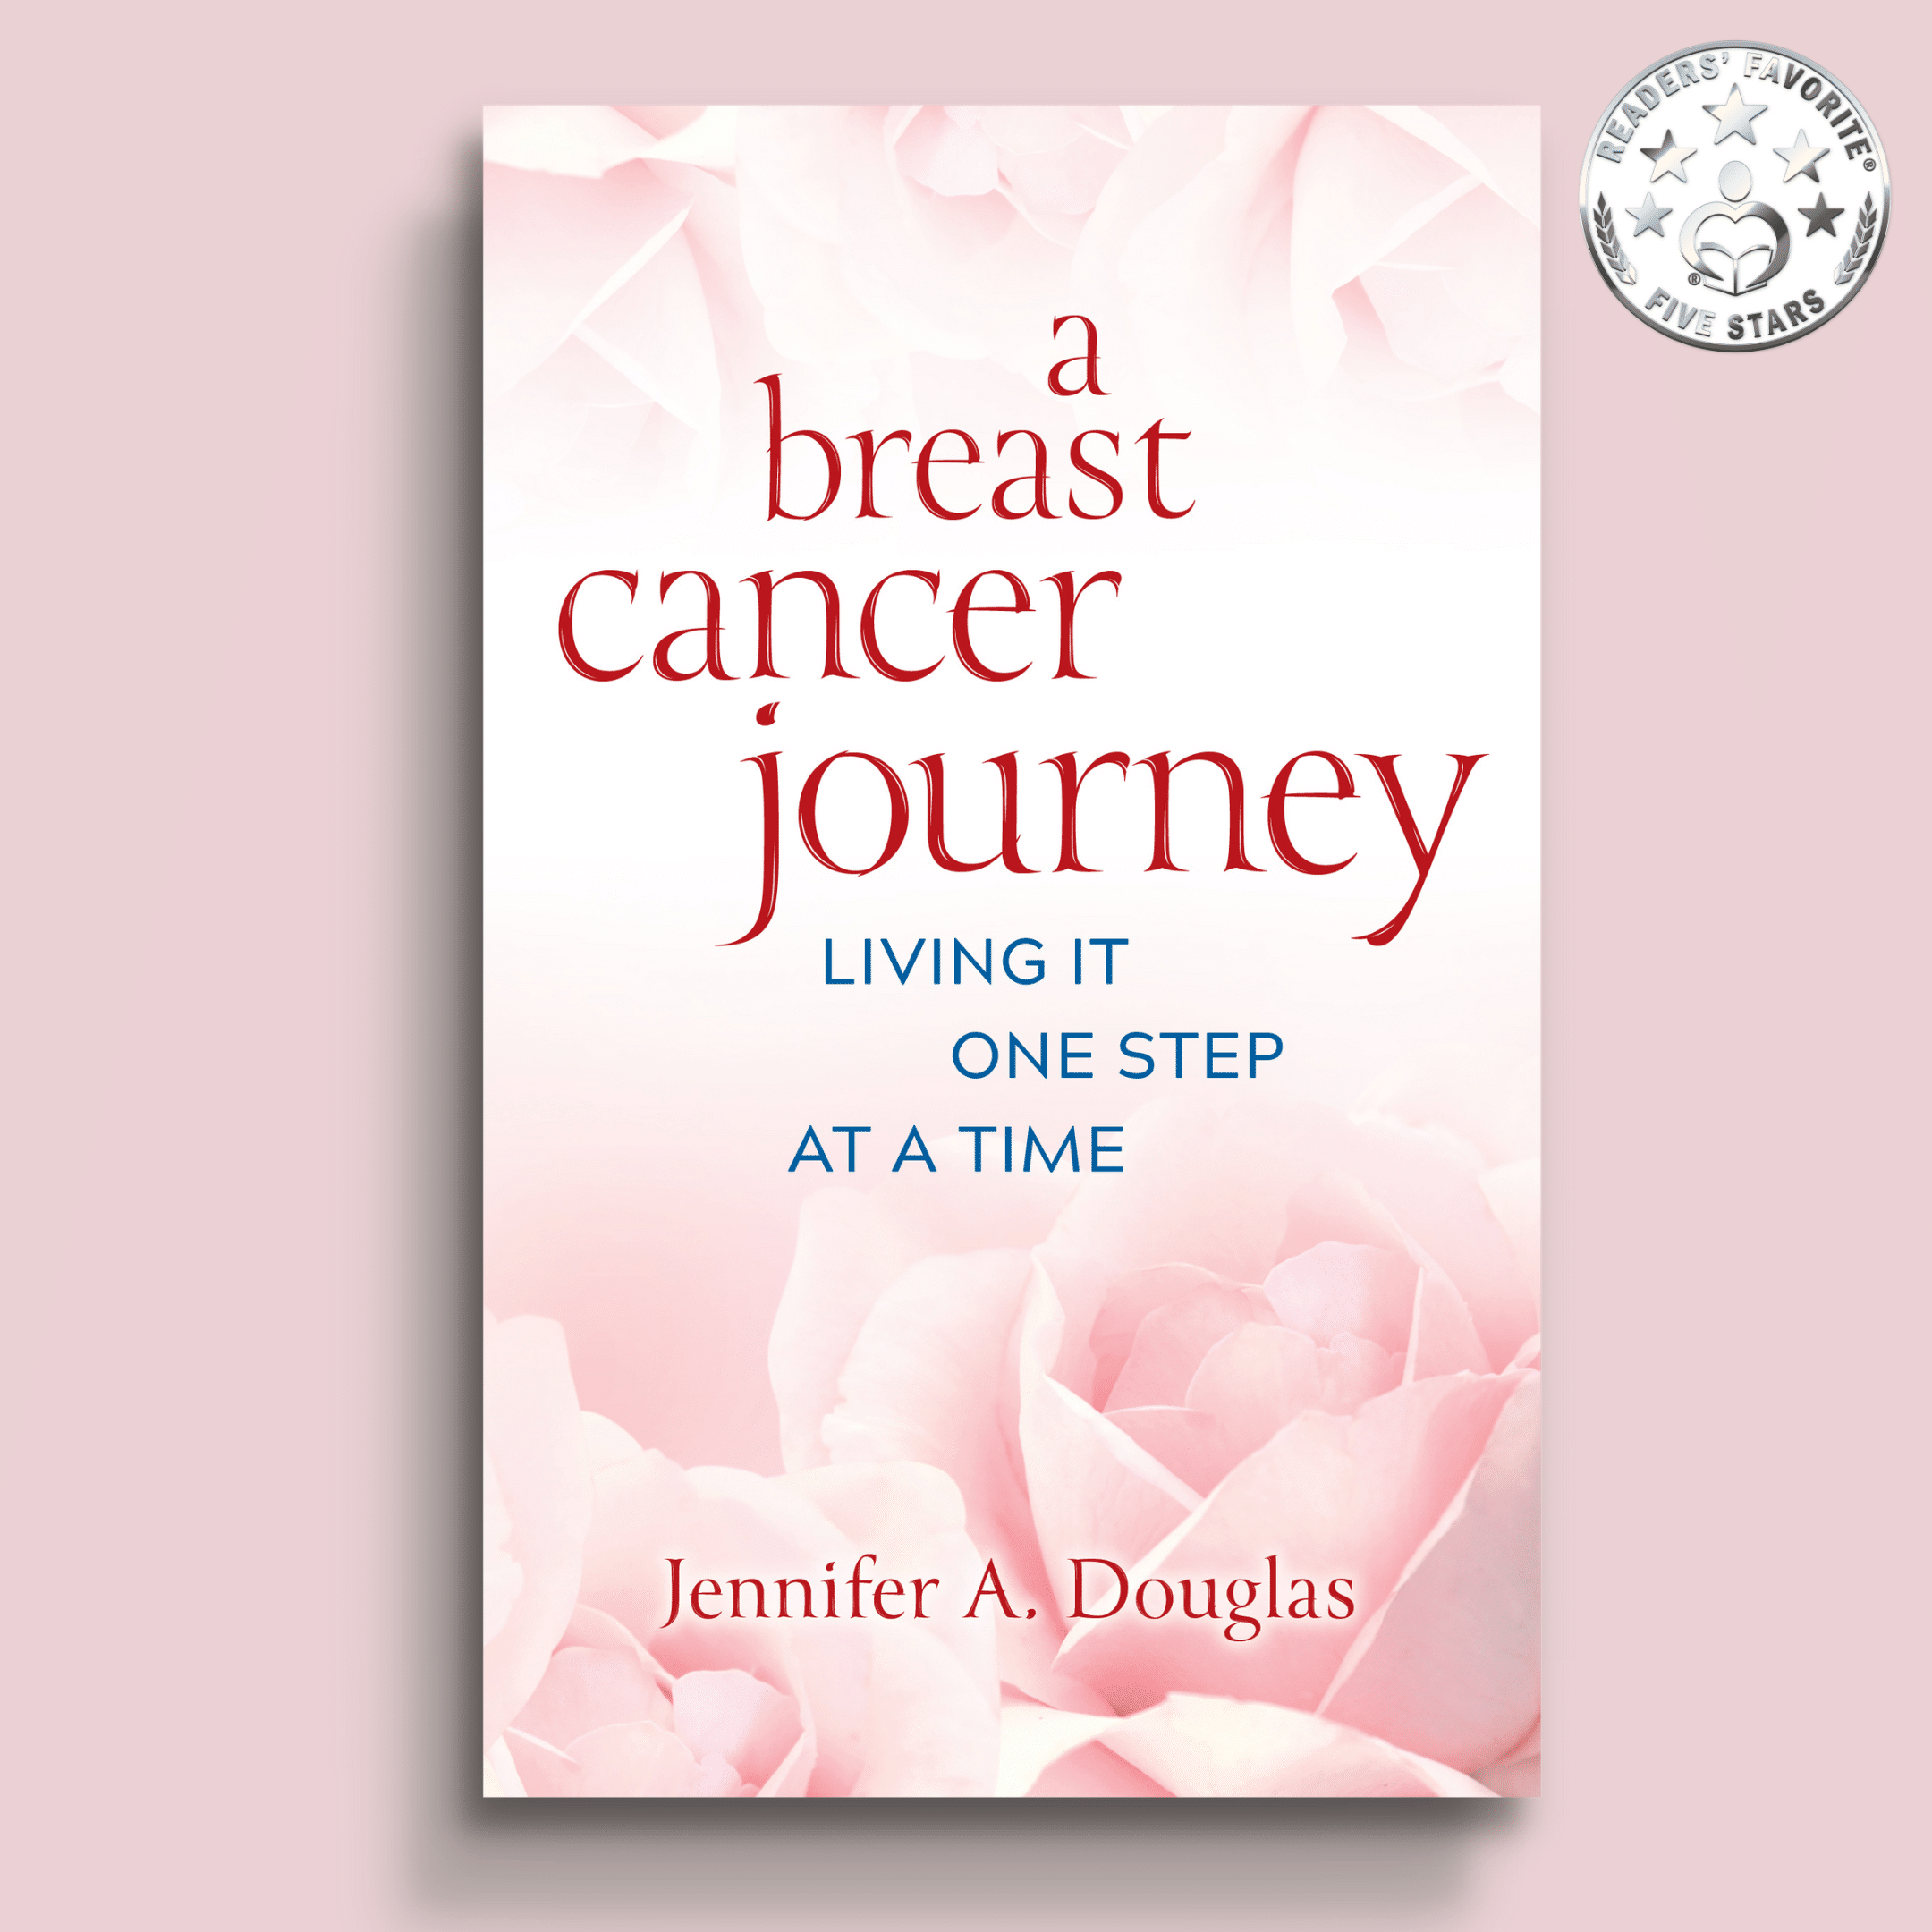 "A Breast Cancer Journey: Living it One Step at a Time" book cover